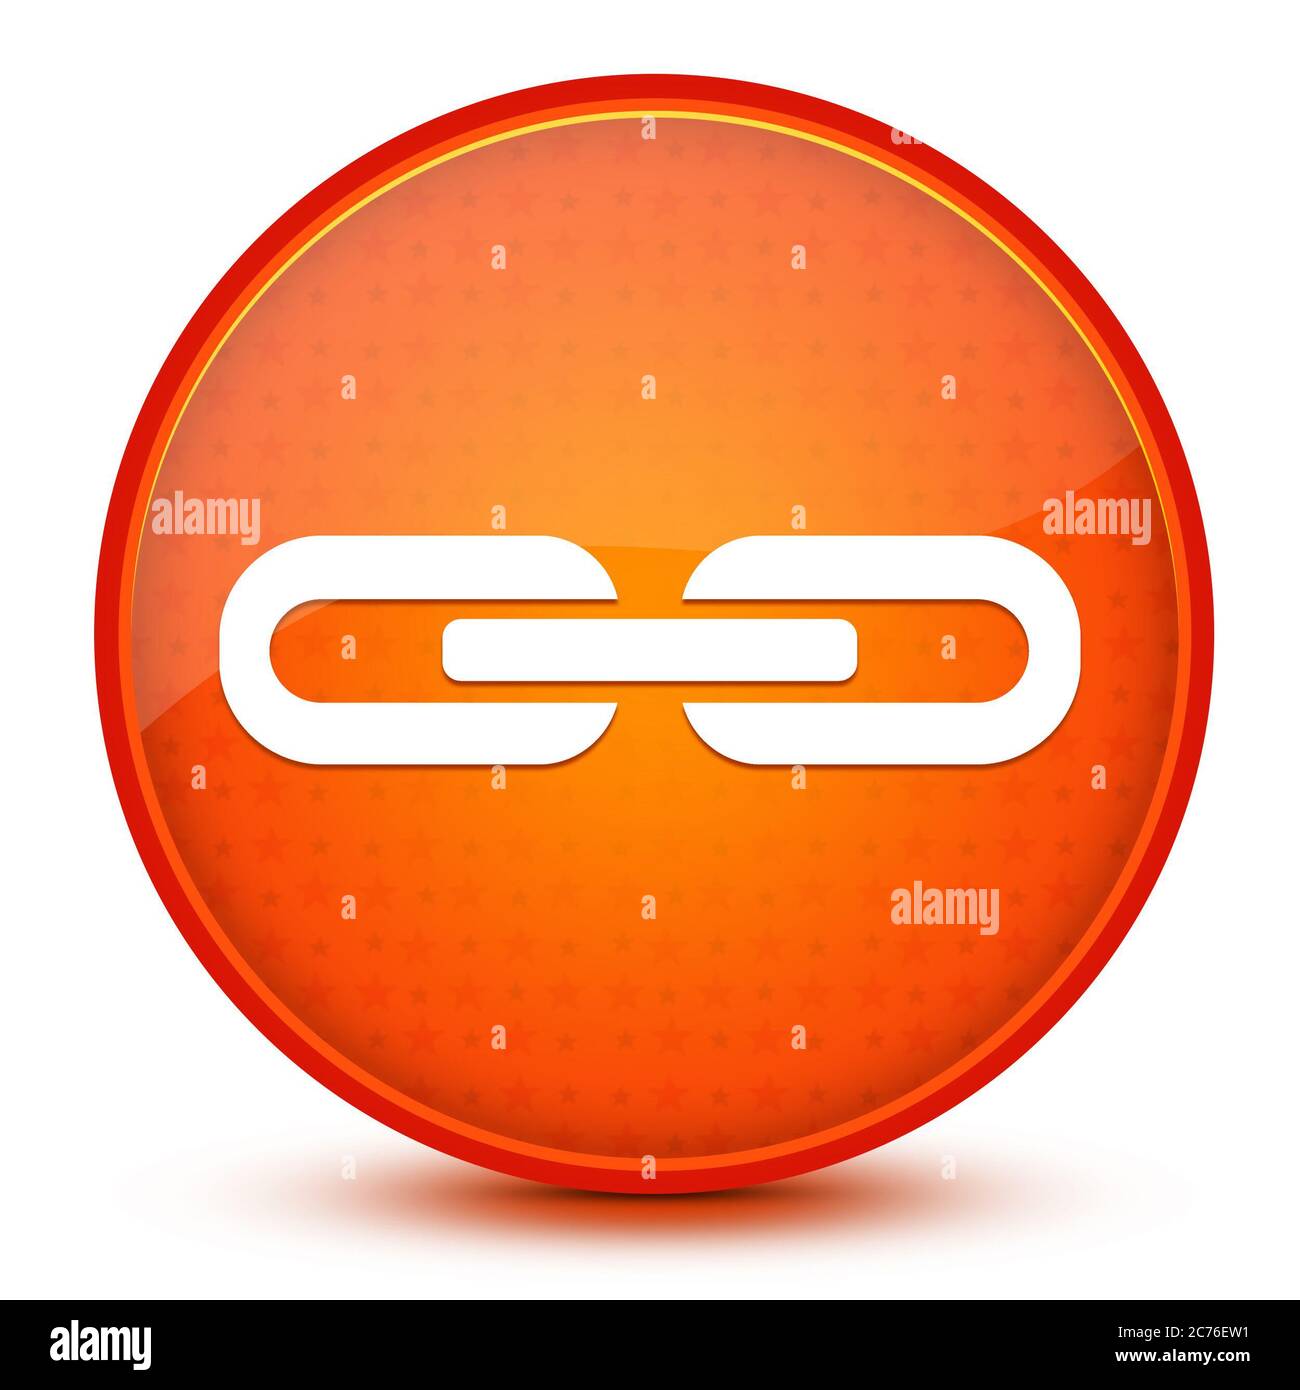 Link icon isolated on glossy star orange round button abstract illustration Stock Photo